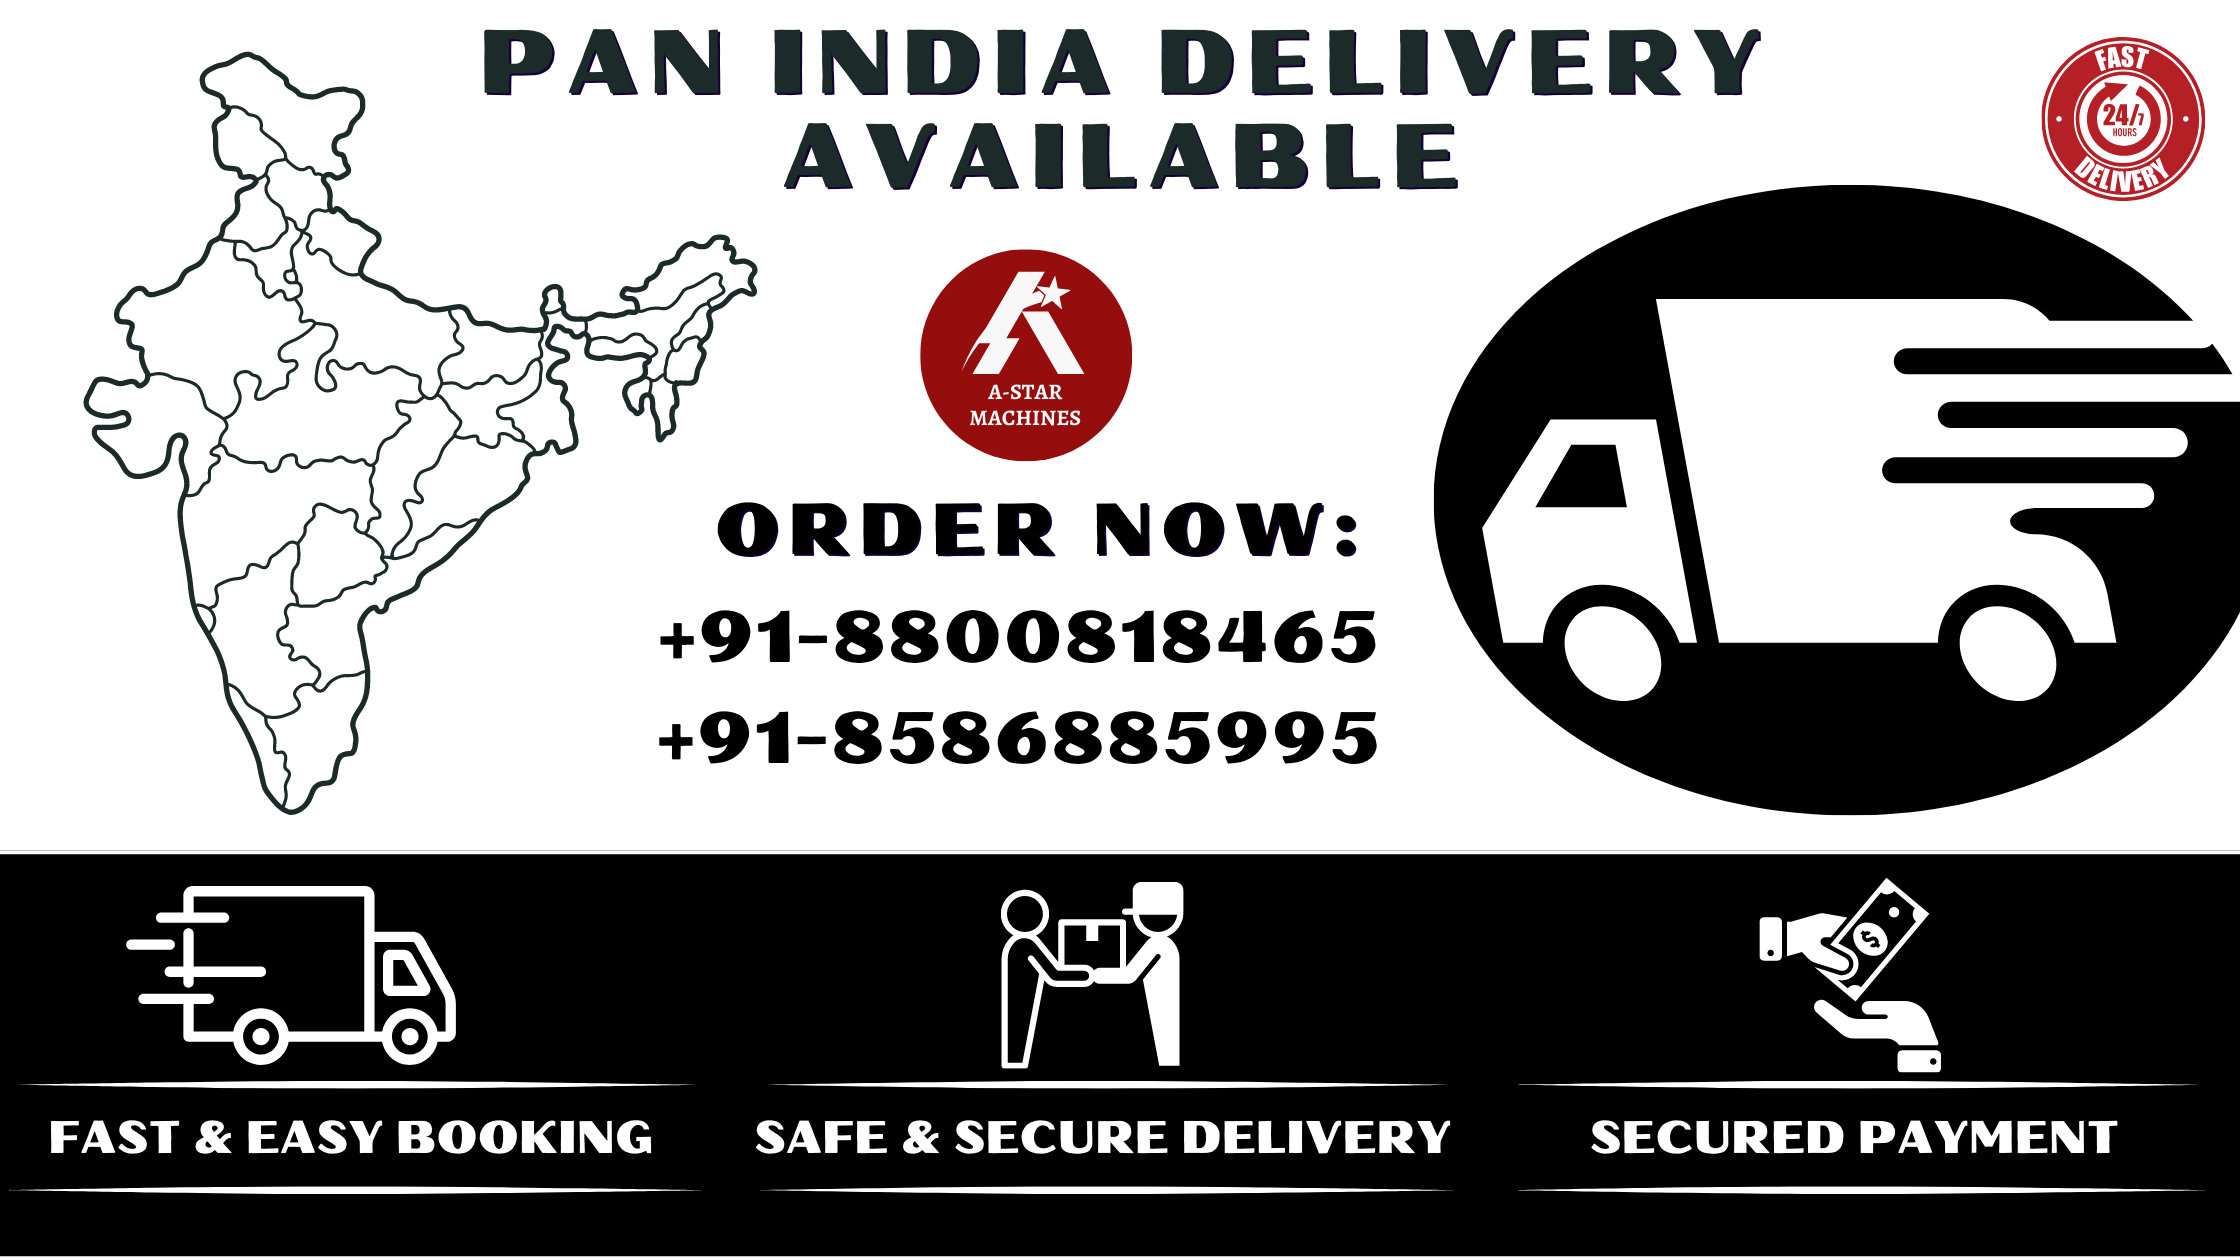 A Star Machines Pan India Delivery Available